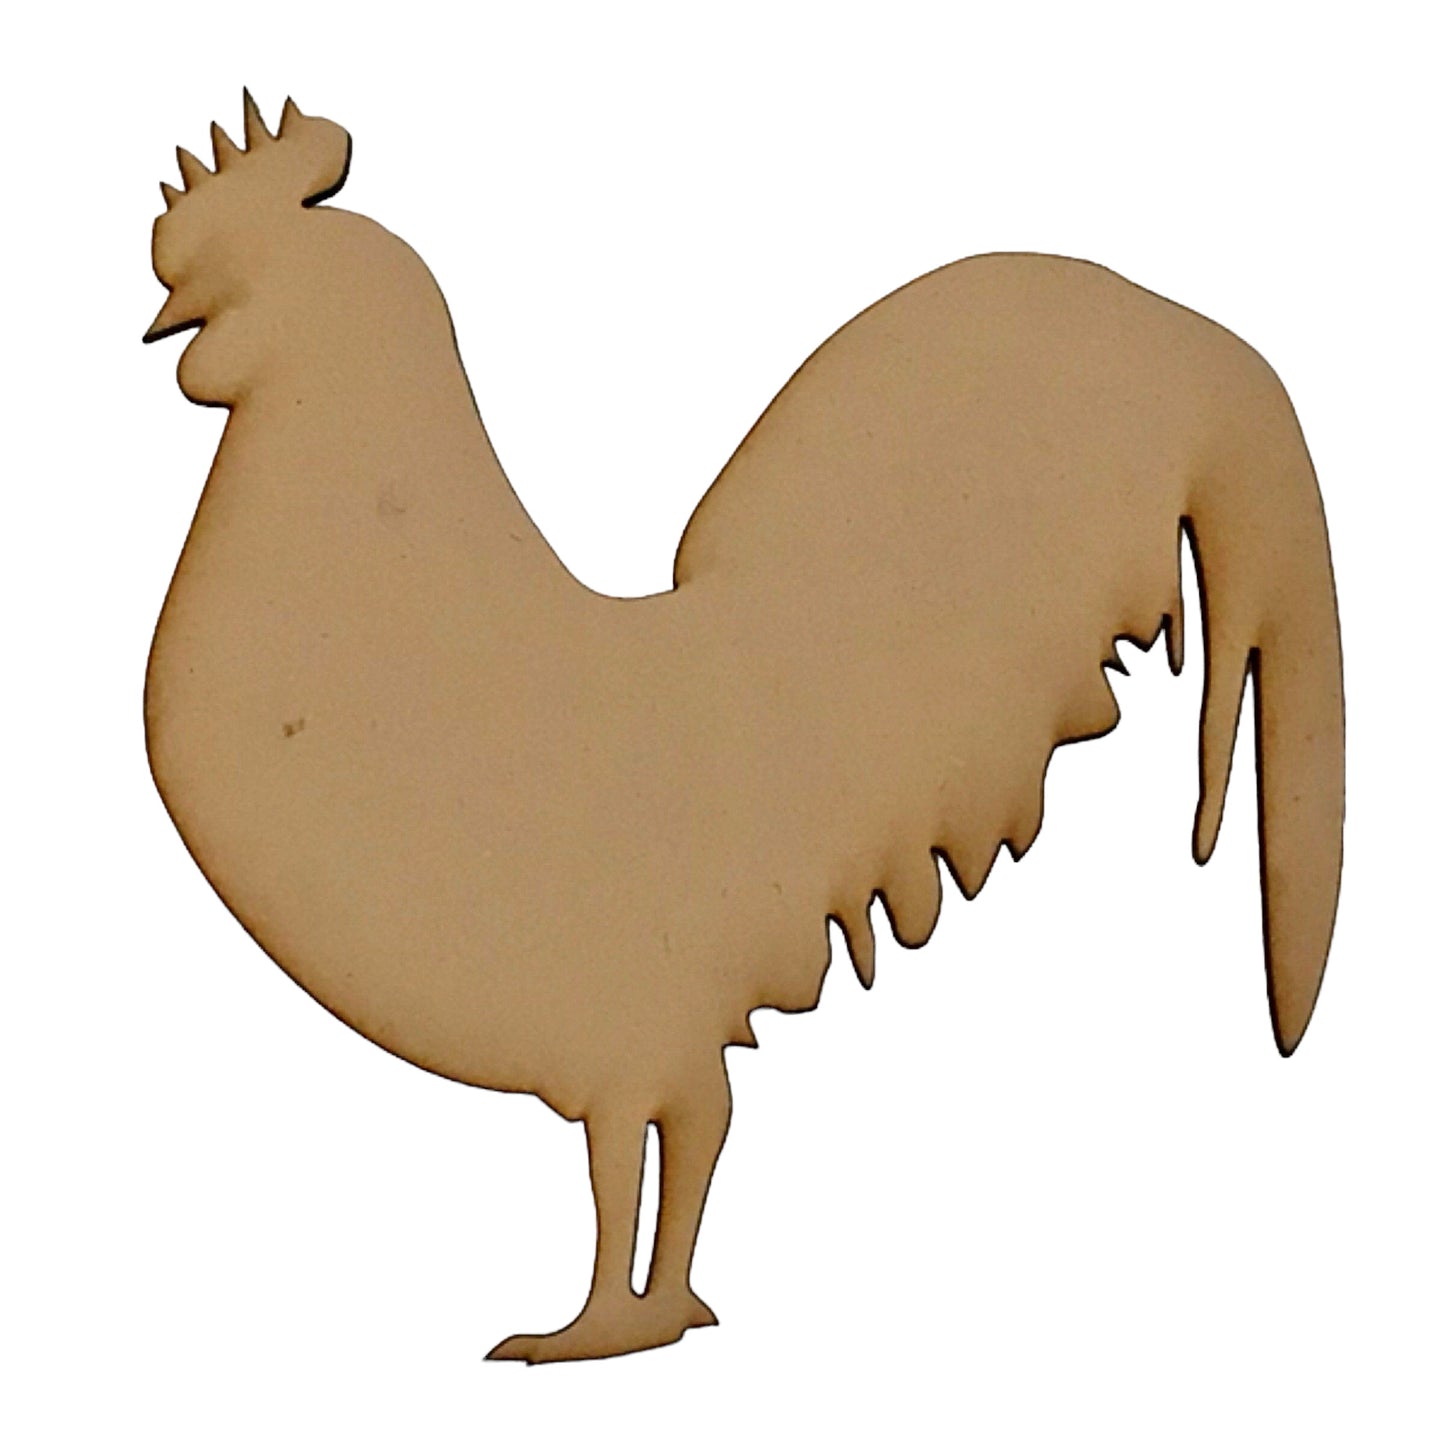 Rooster MDF Shape DIY Raw Cut Out Art Craft Decor - The Renmy Store Homewares & Gifts 